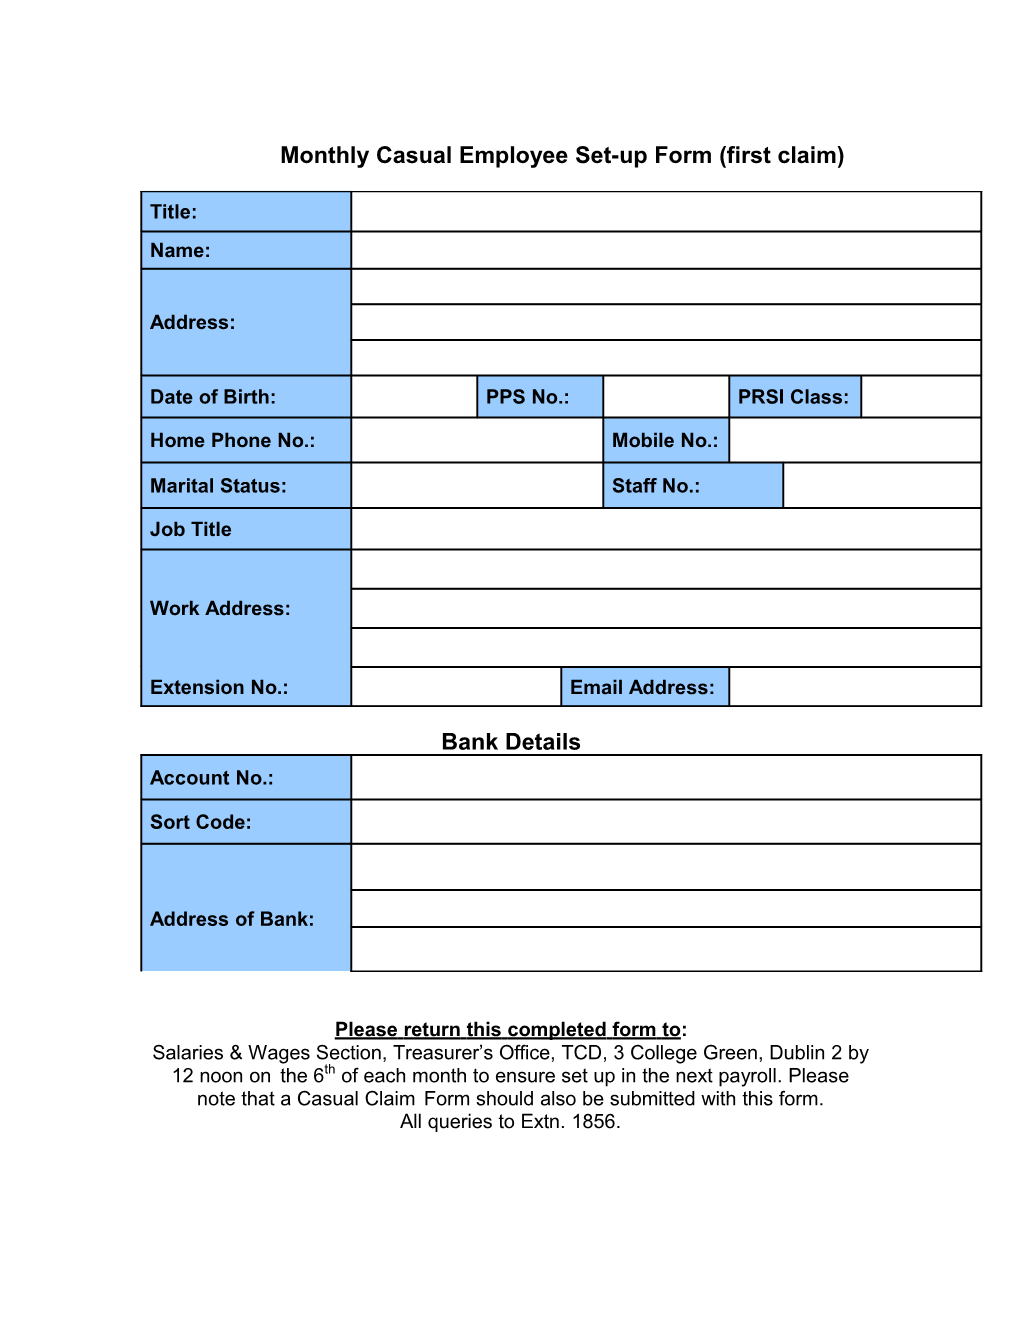 Monthly Casual Employee Set-Up Form (First Claim)